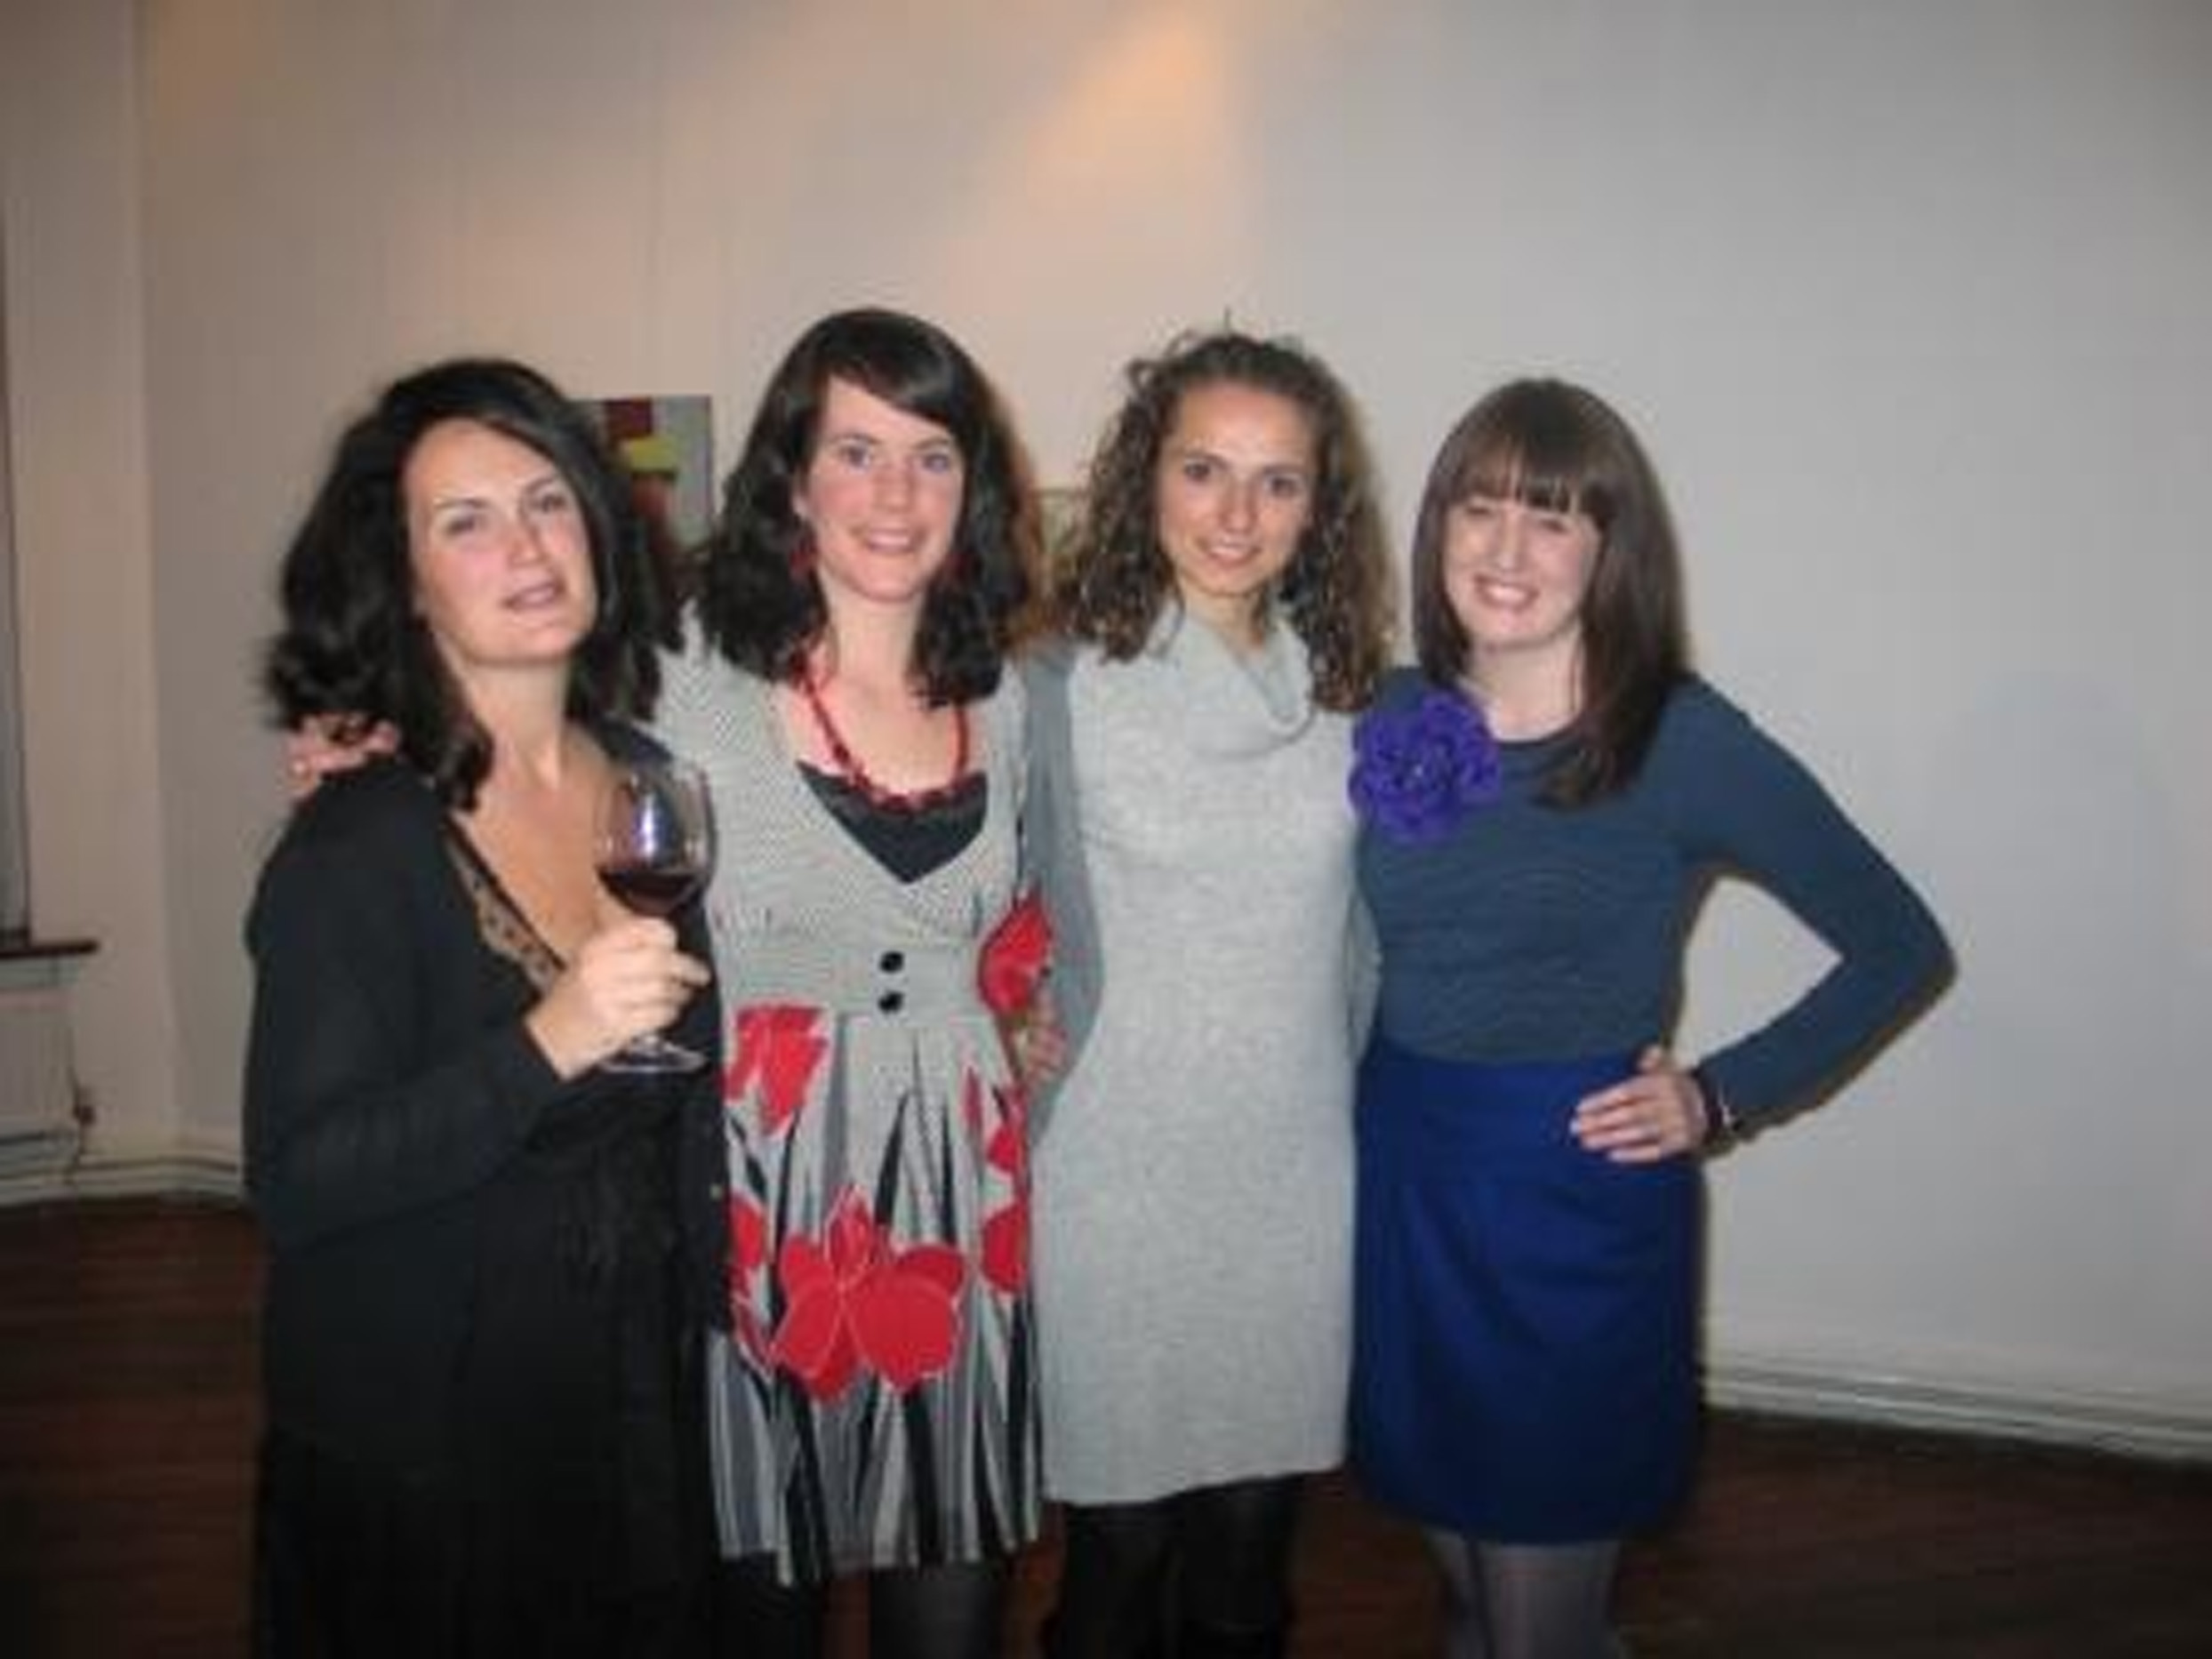 From left to right: Elaine Grainger (gallery manager), gallery assistants Roisin Russell and Lourdes Viso, and artist Anne Hendrick